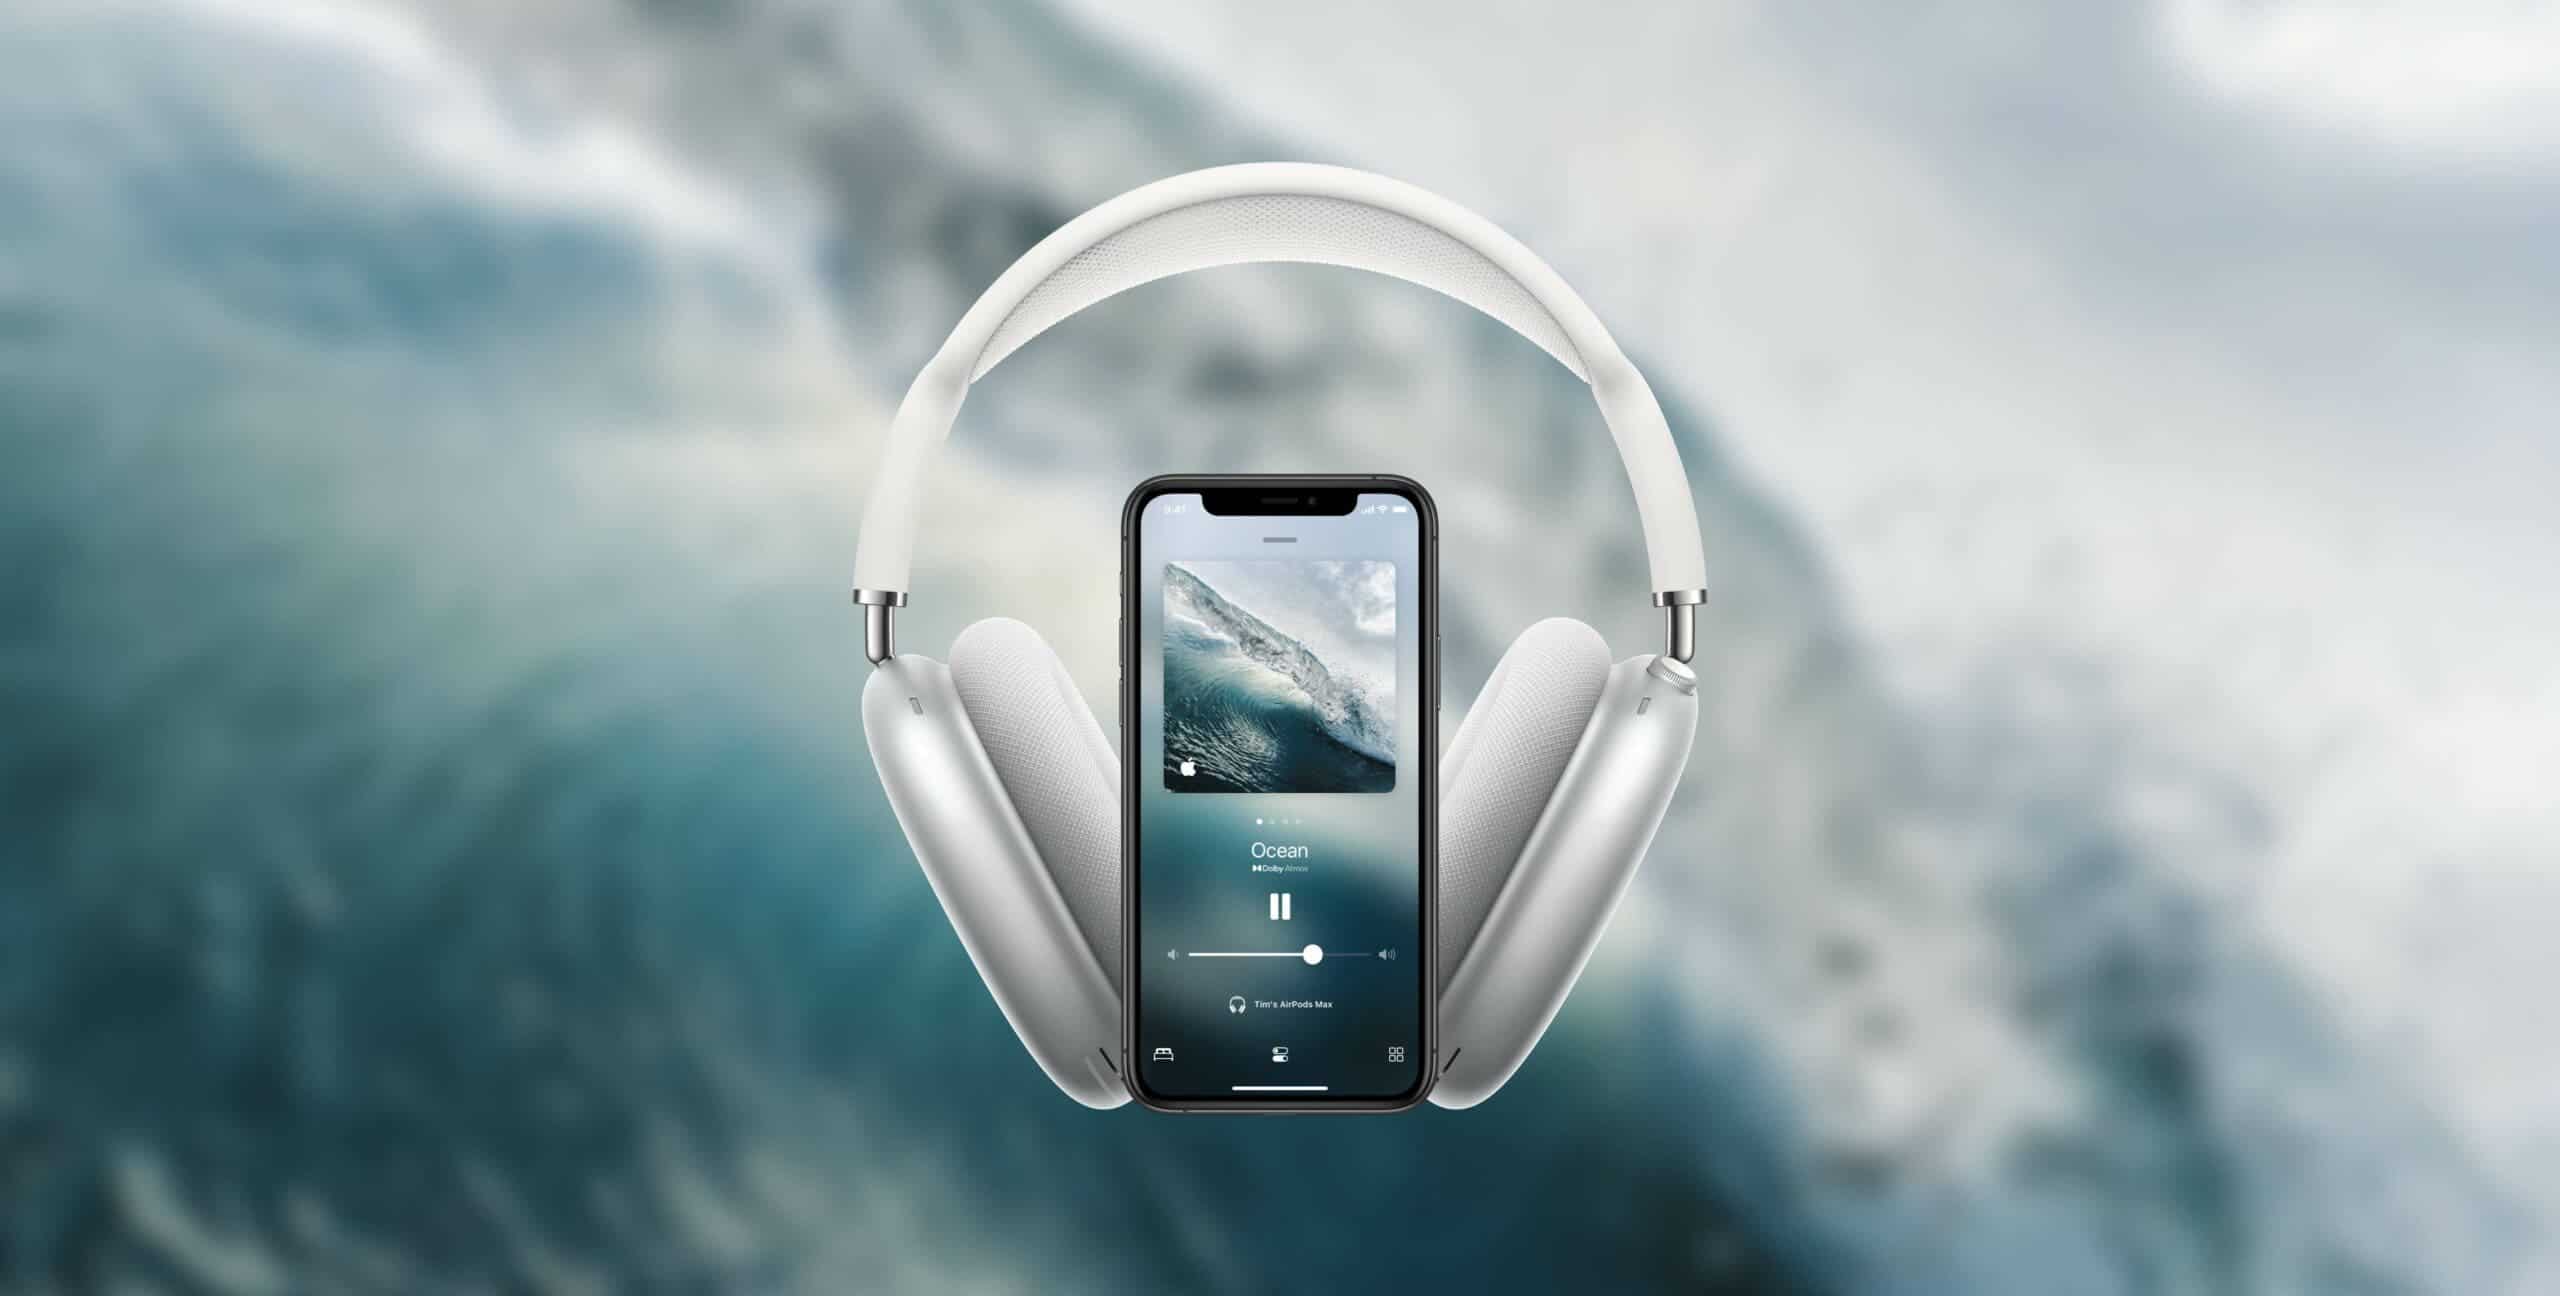 background sounds in iOS 15